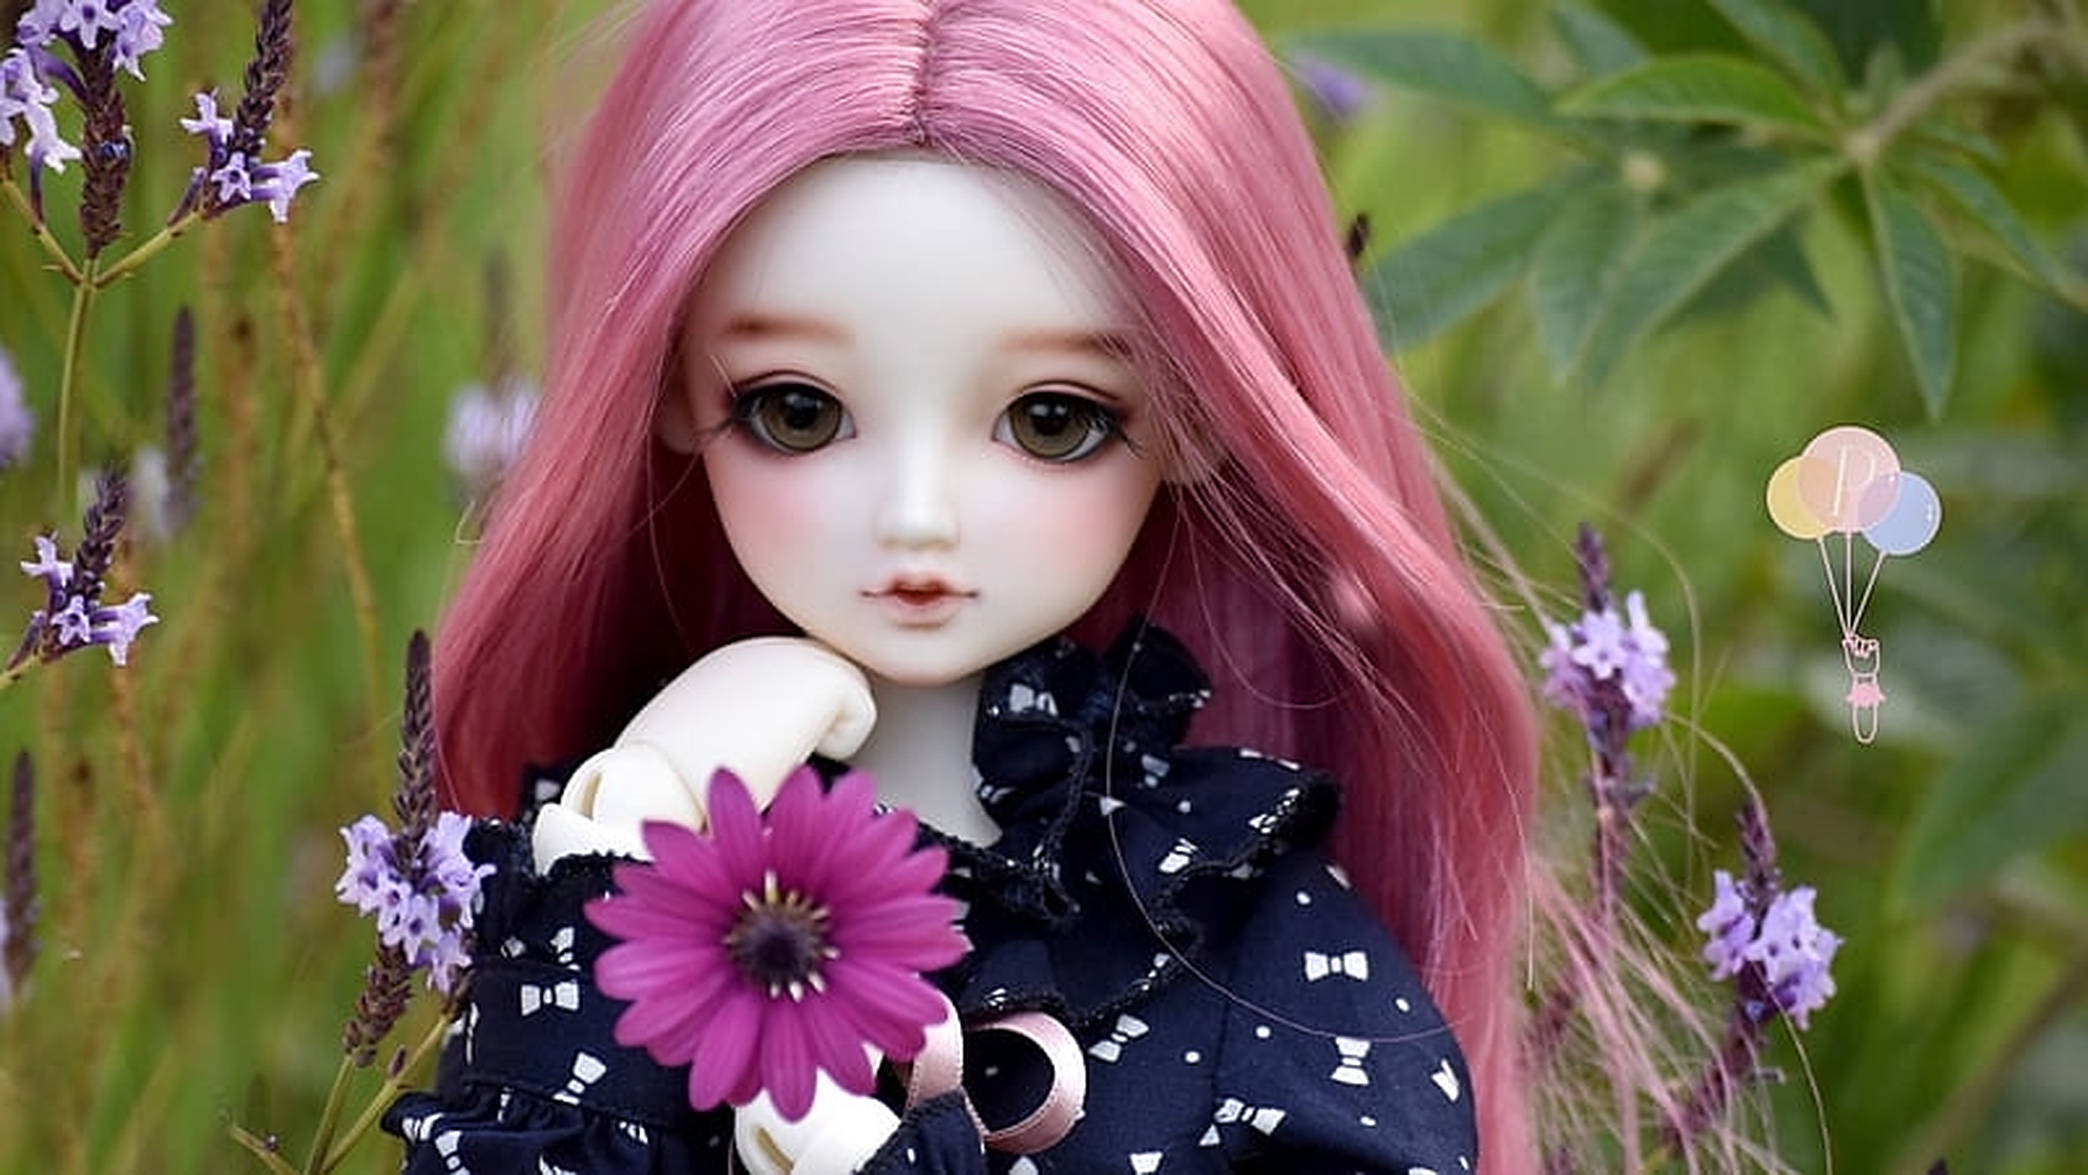 Download Pink Hair Doll With Flower Wallpaper 